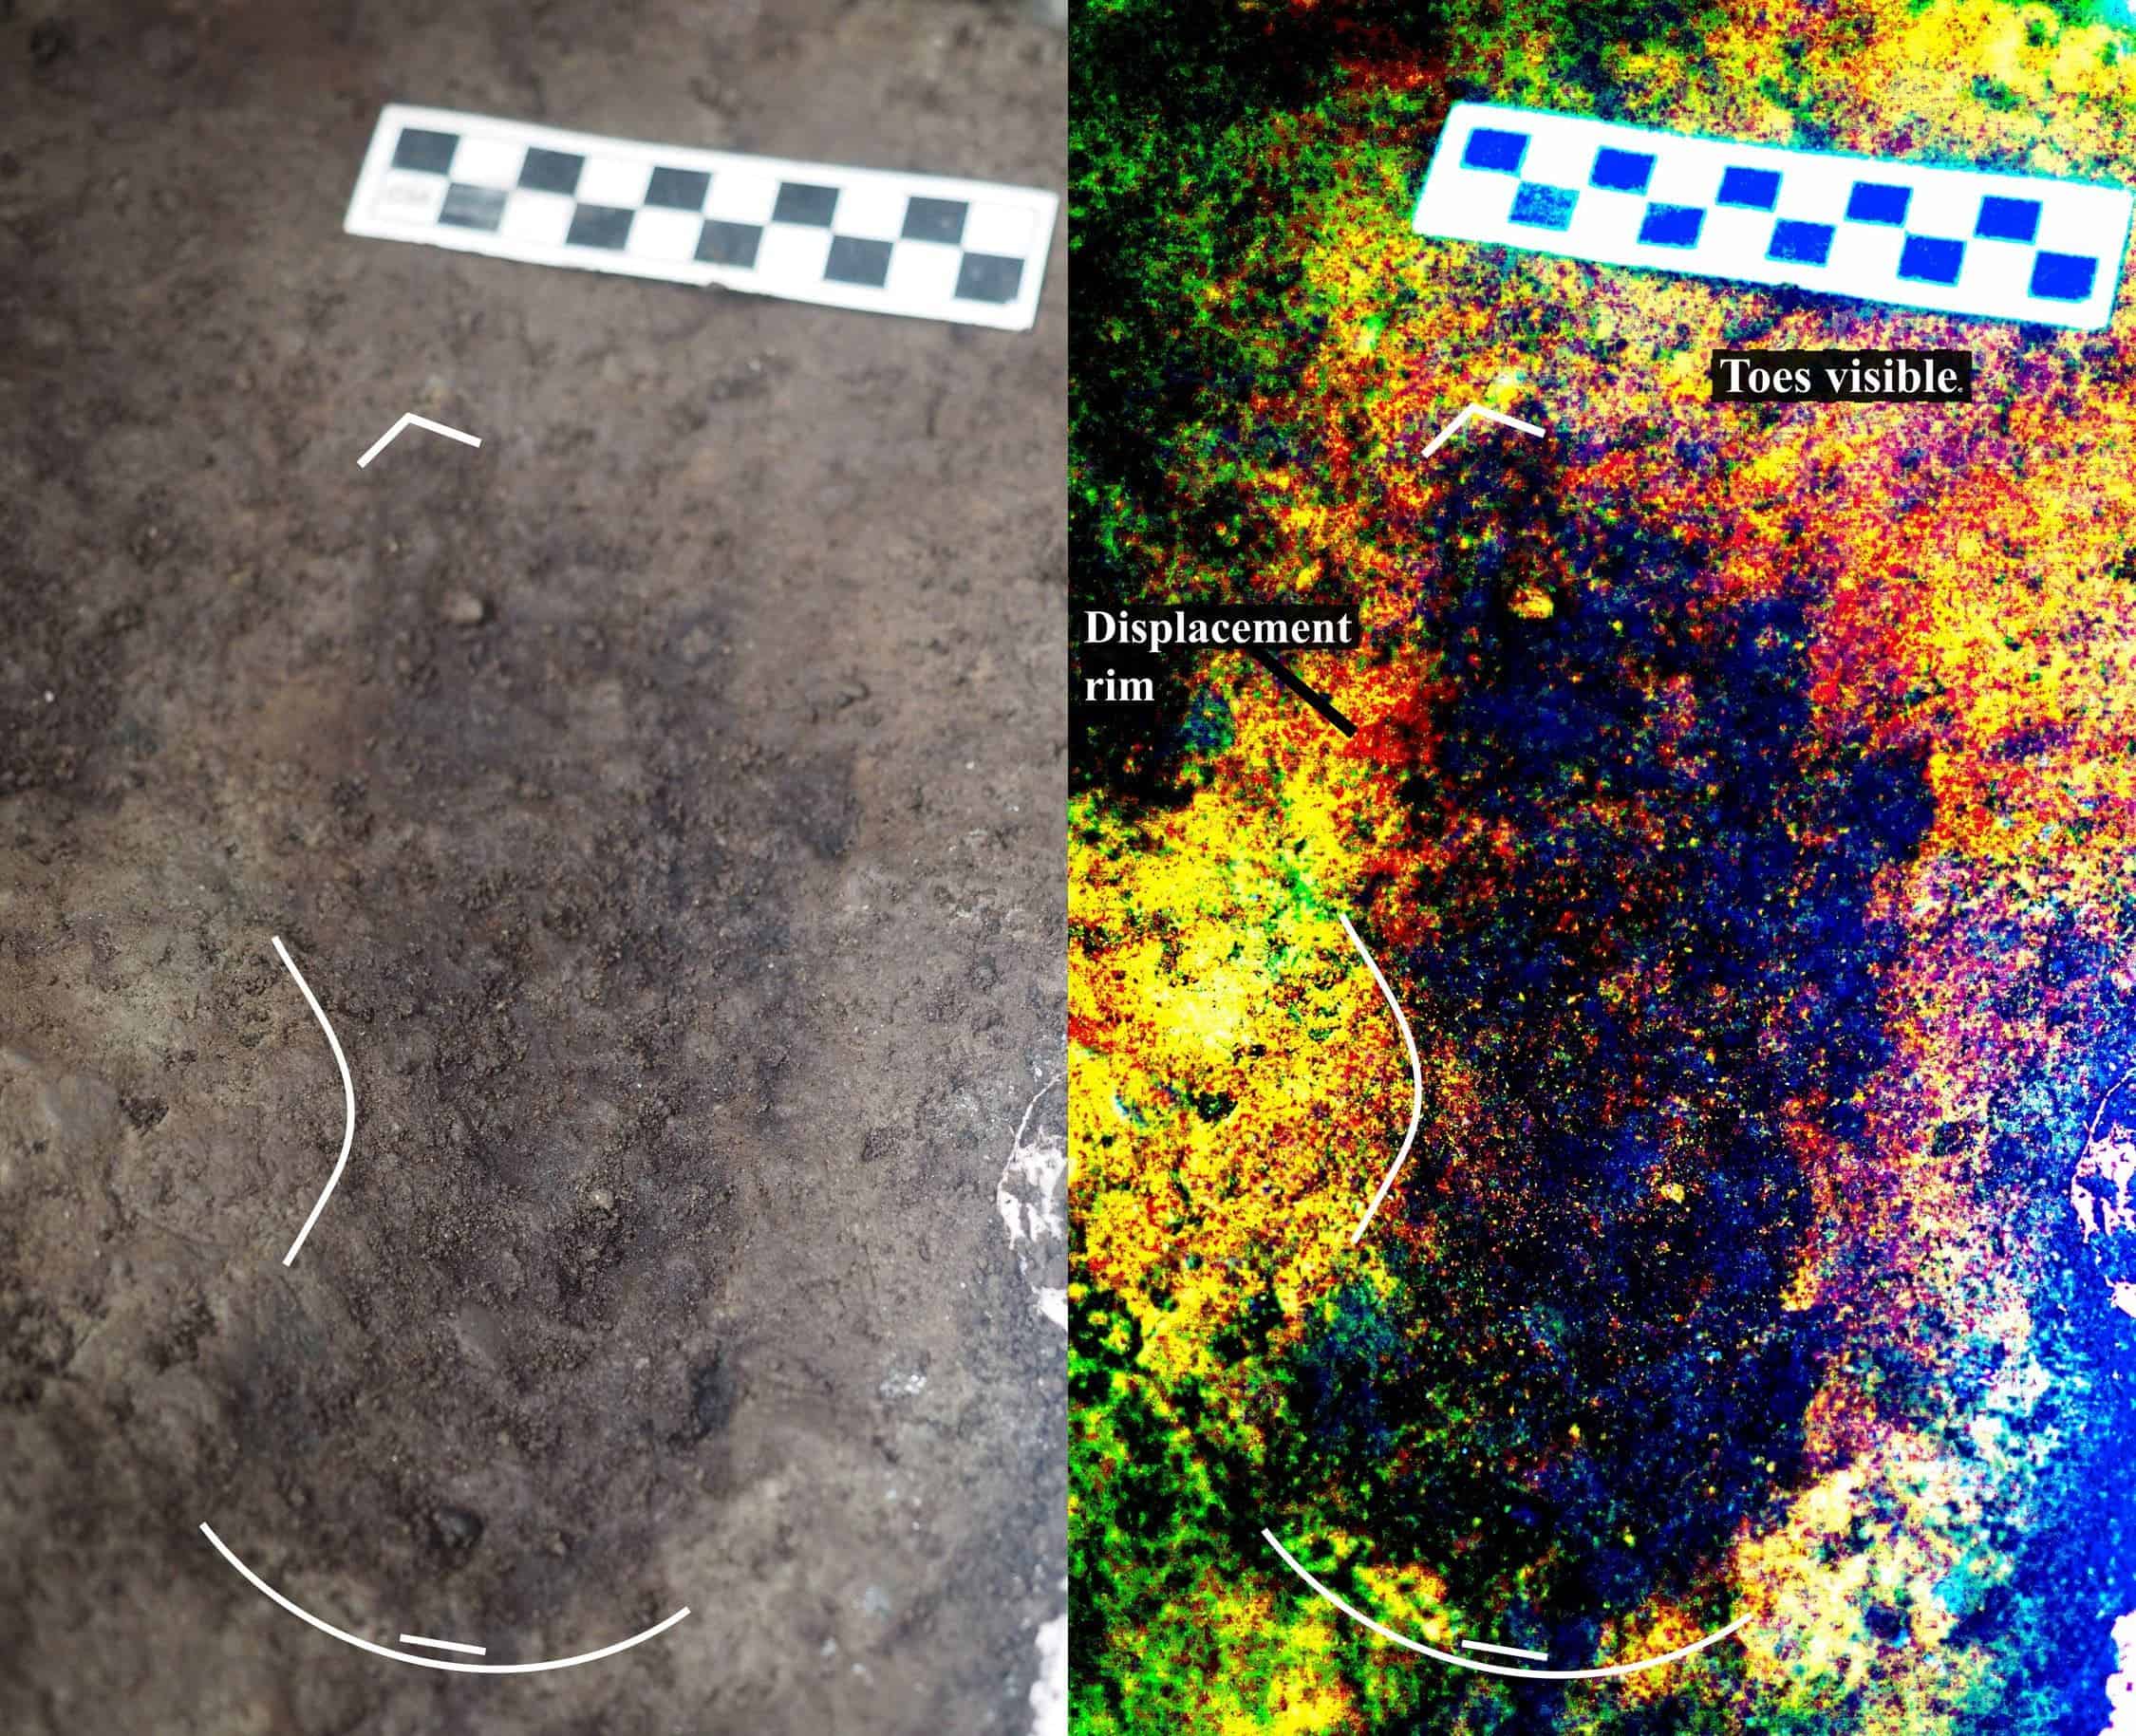 Photograph of one of the tracks beside digitally-enhanced image of same feature. Note the toe impressions and arch indicating that this is a right footprint. Image credits: Duncan McLaren.